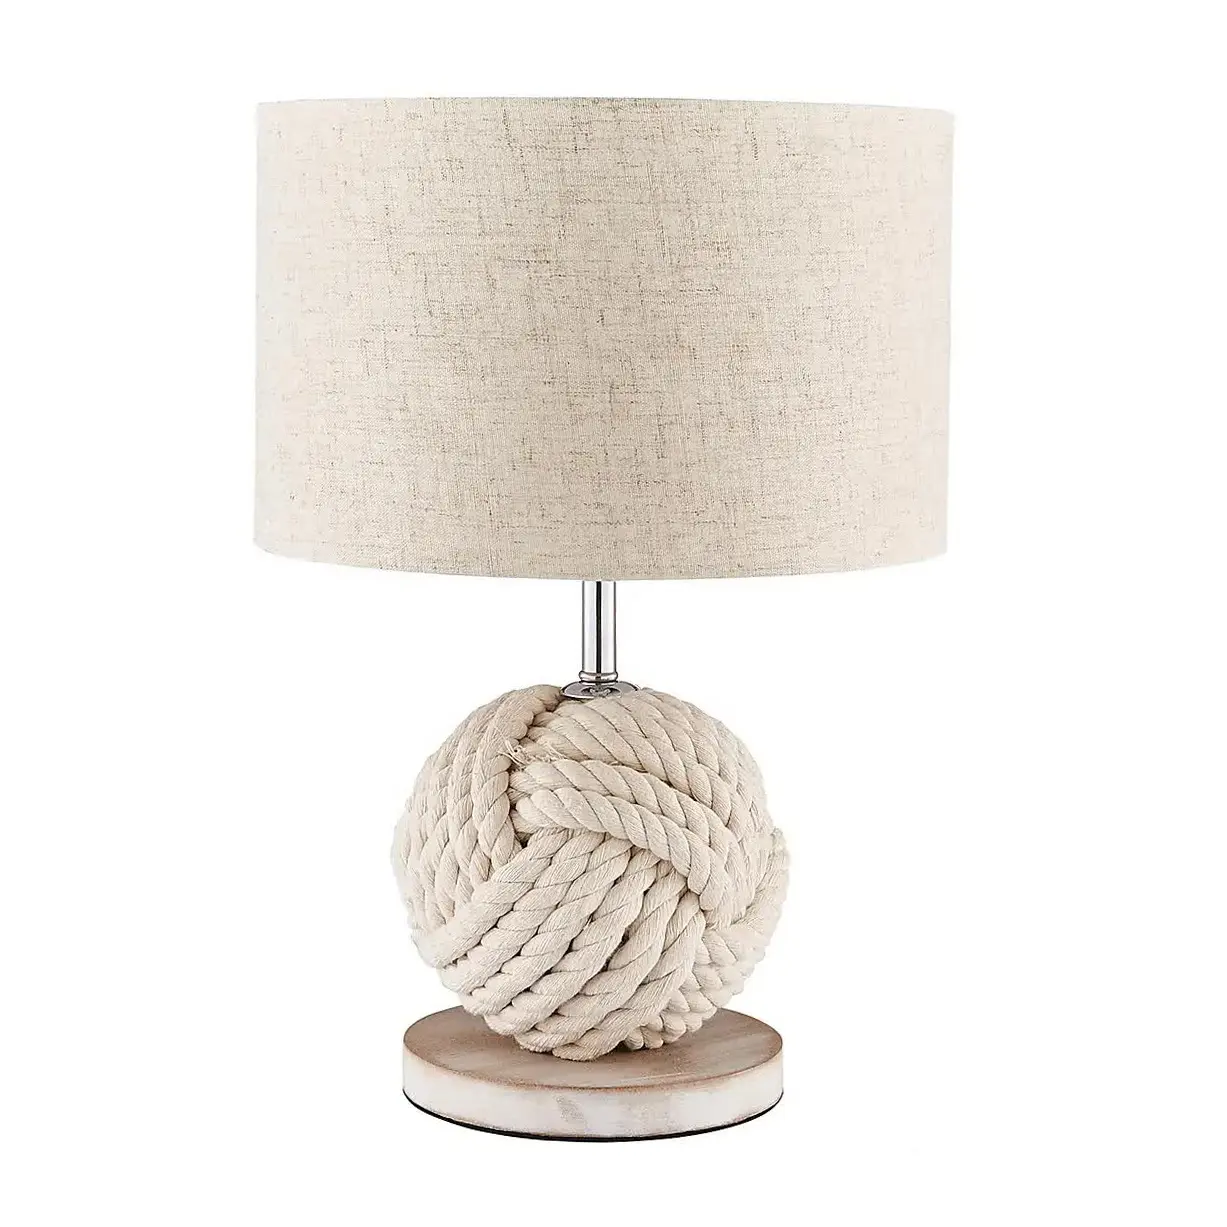 Rope Design Table Lamp for Bedside Bedroom Decorations Premium Quality Natural Rope Base Table Lamp for Hotels and Restaurants